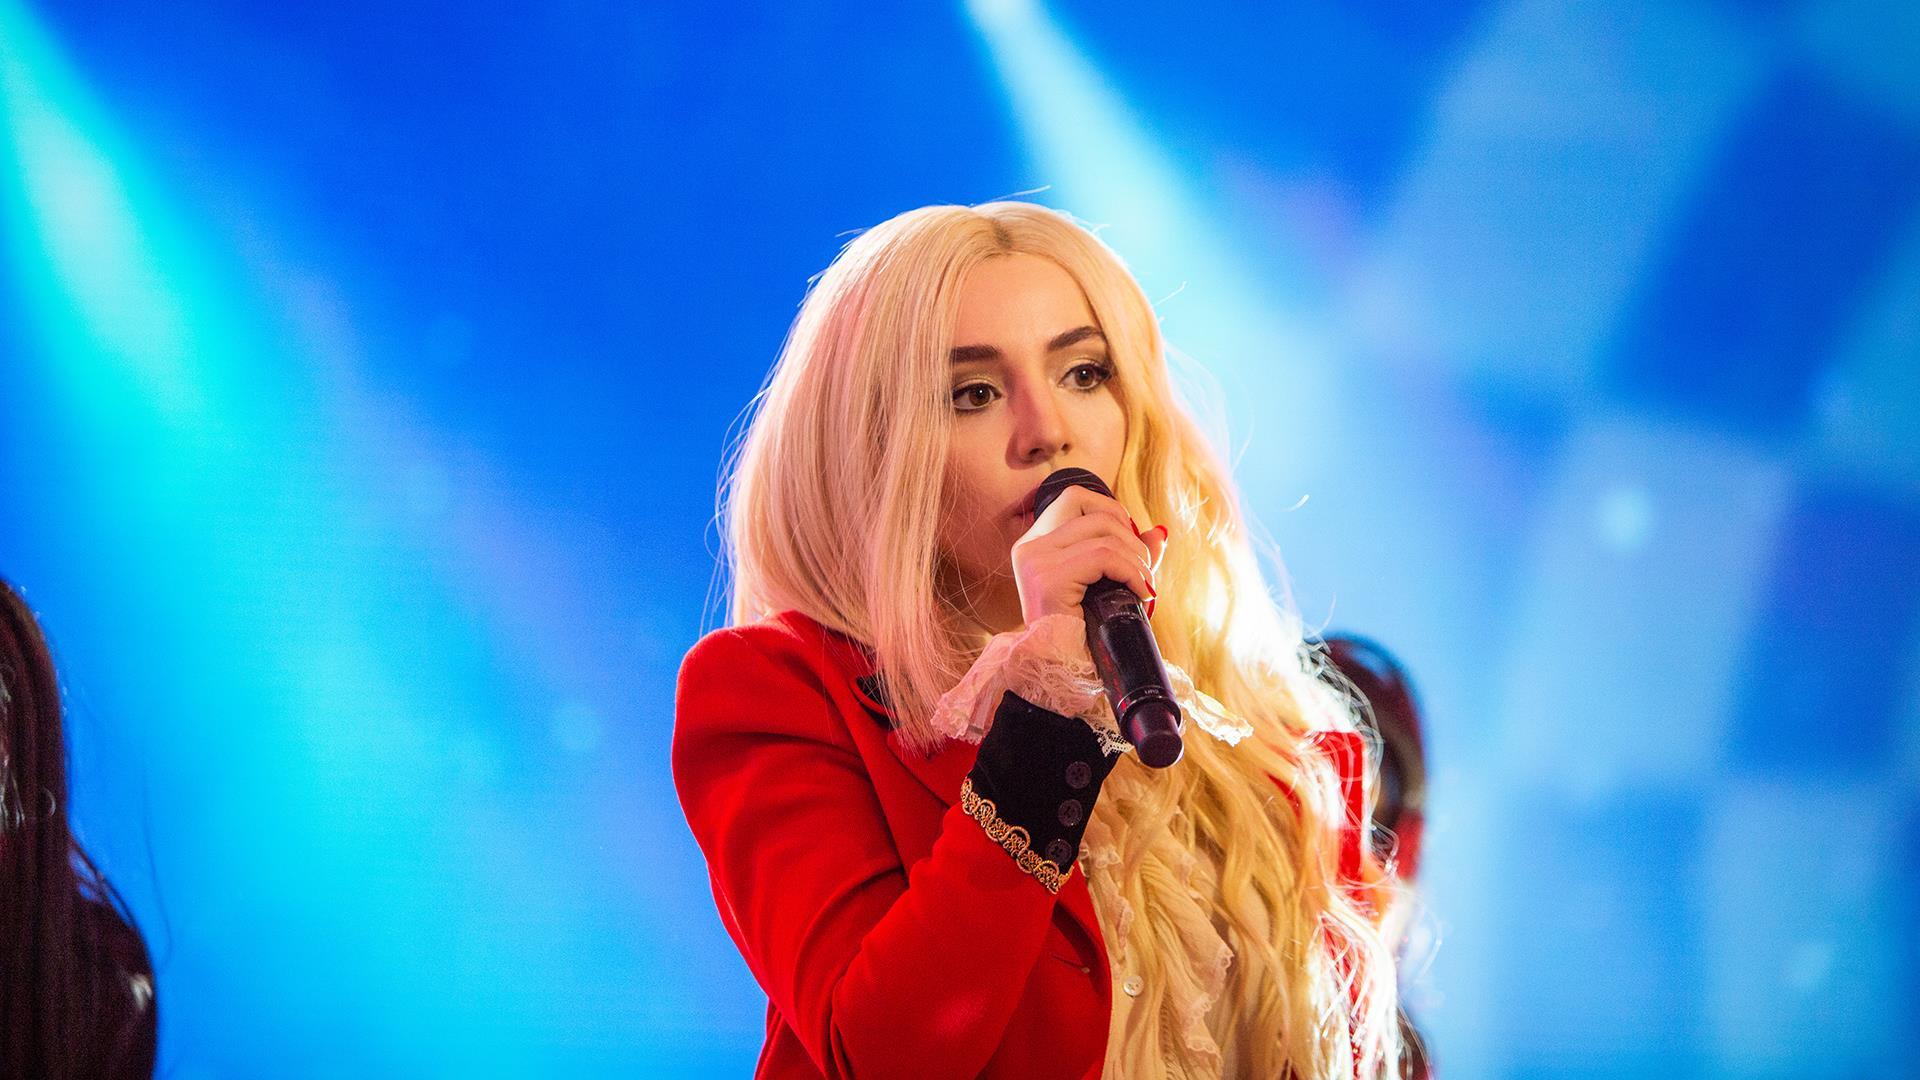 Watch Ava Max perform 'Sweet but Psycho' on TODAY